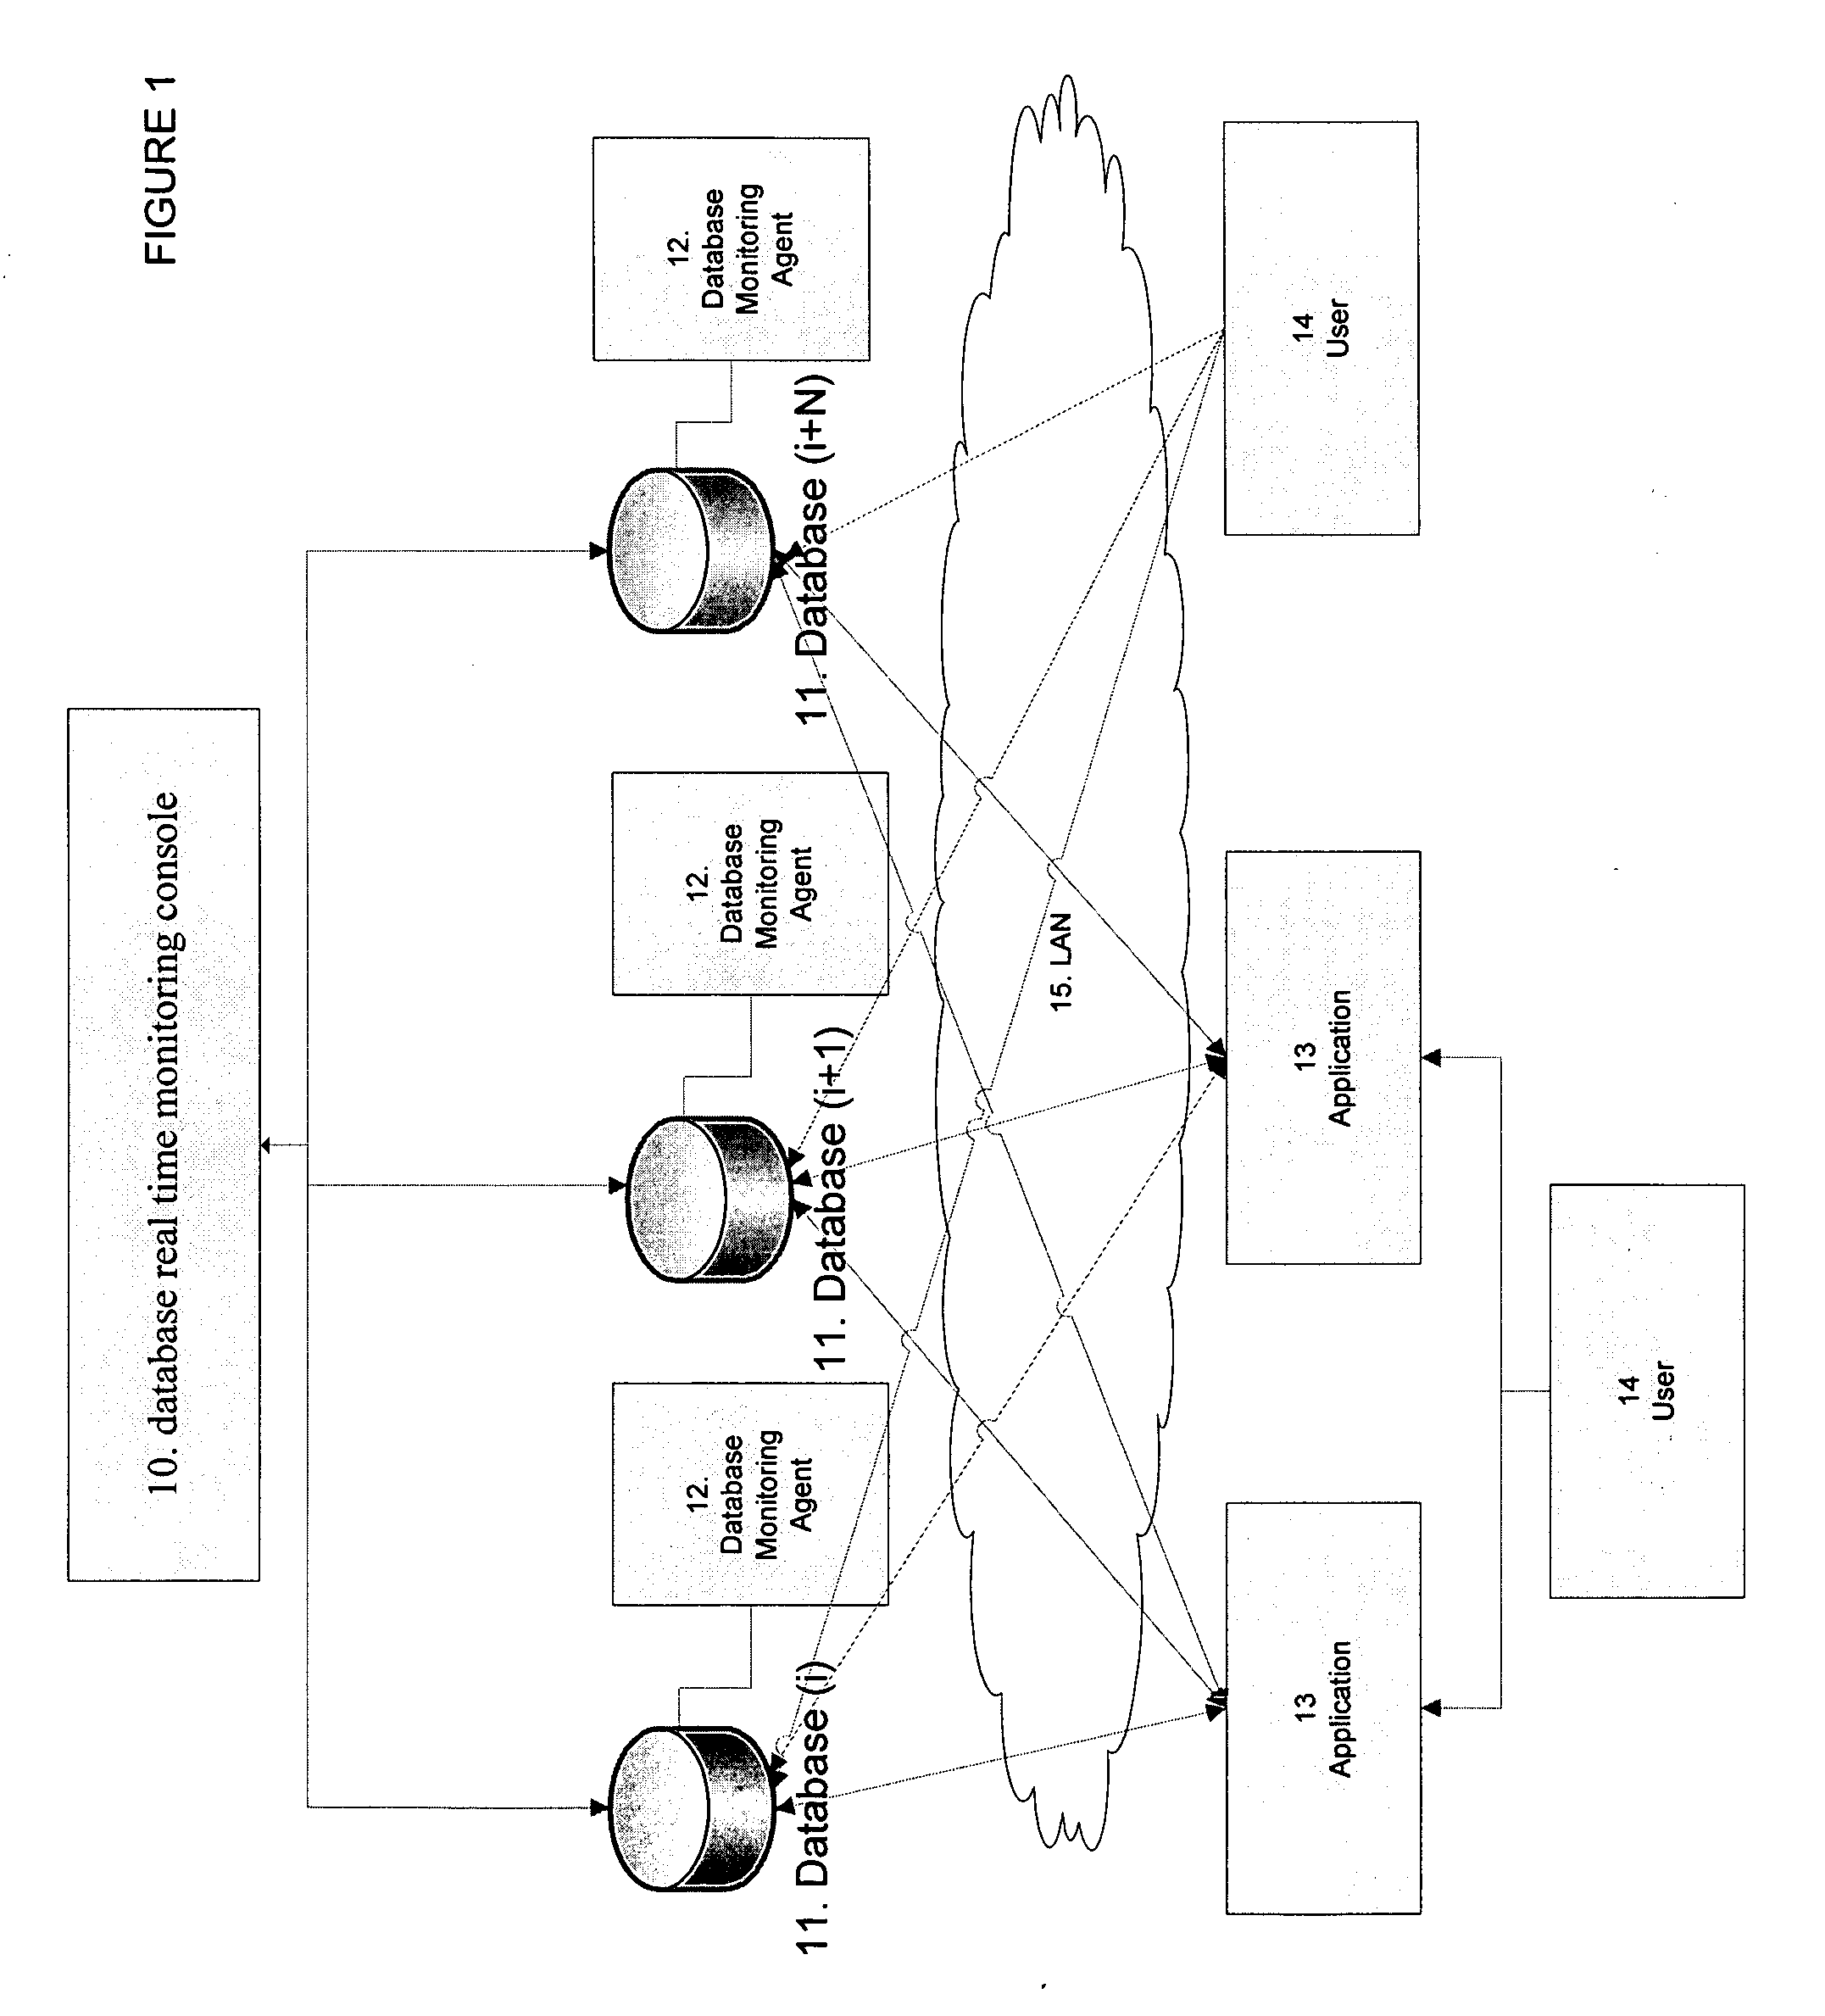 Real-time database performance and availability monitoring method and system